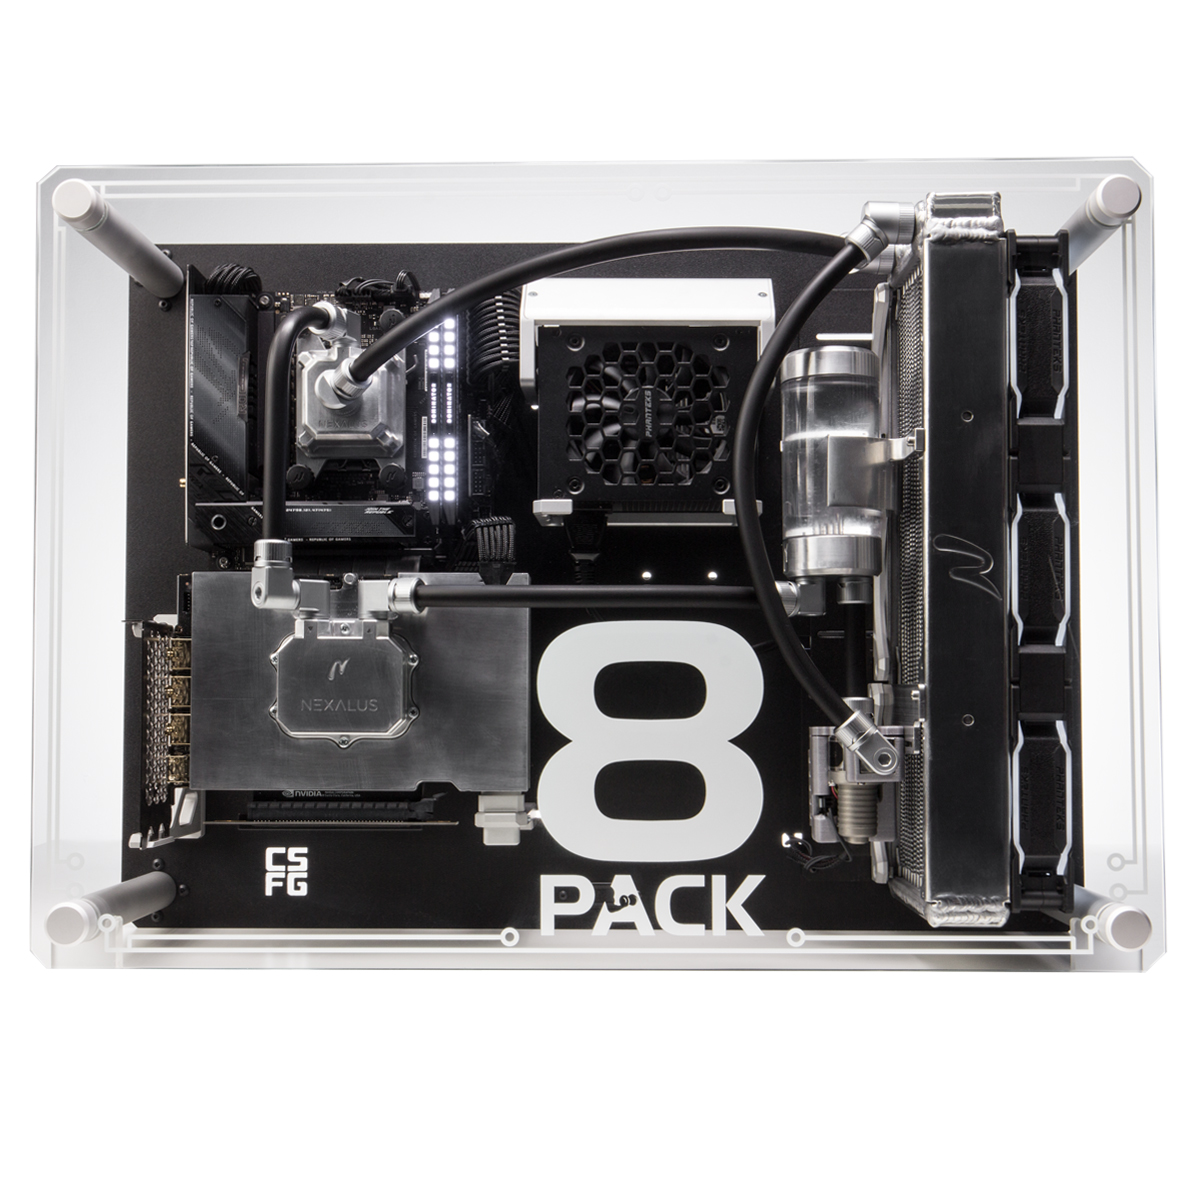 8Pack Frame R8i Mini-ITX Overclocked Wall-Mounted Open Air Gaming PC